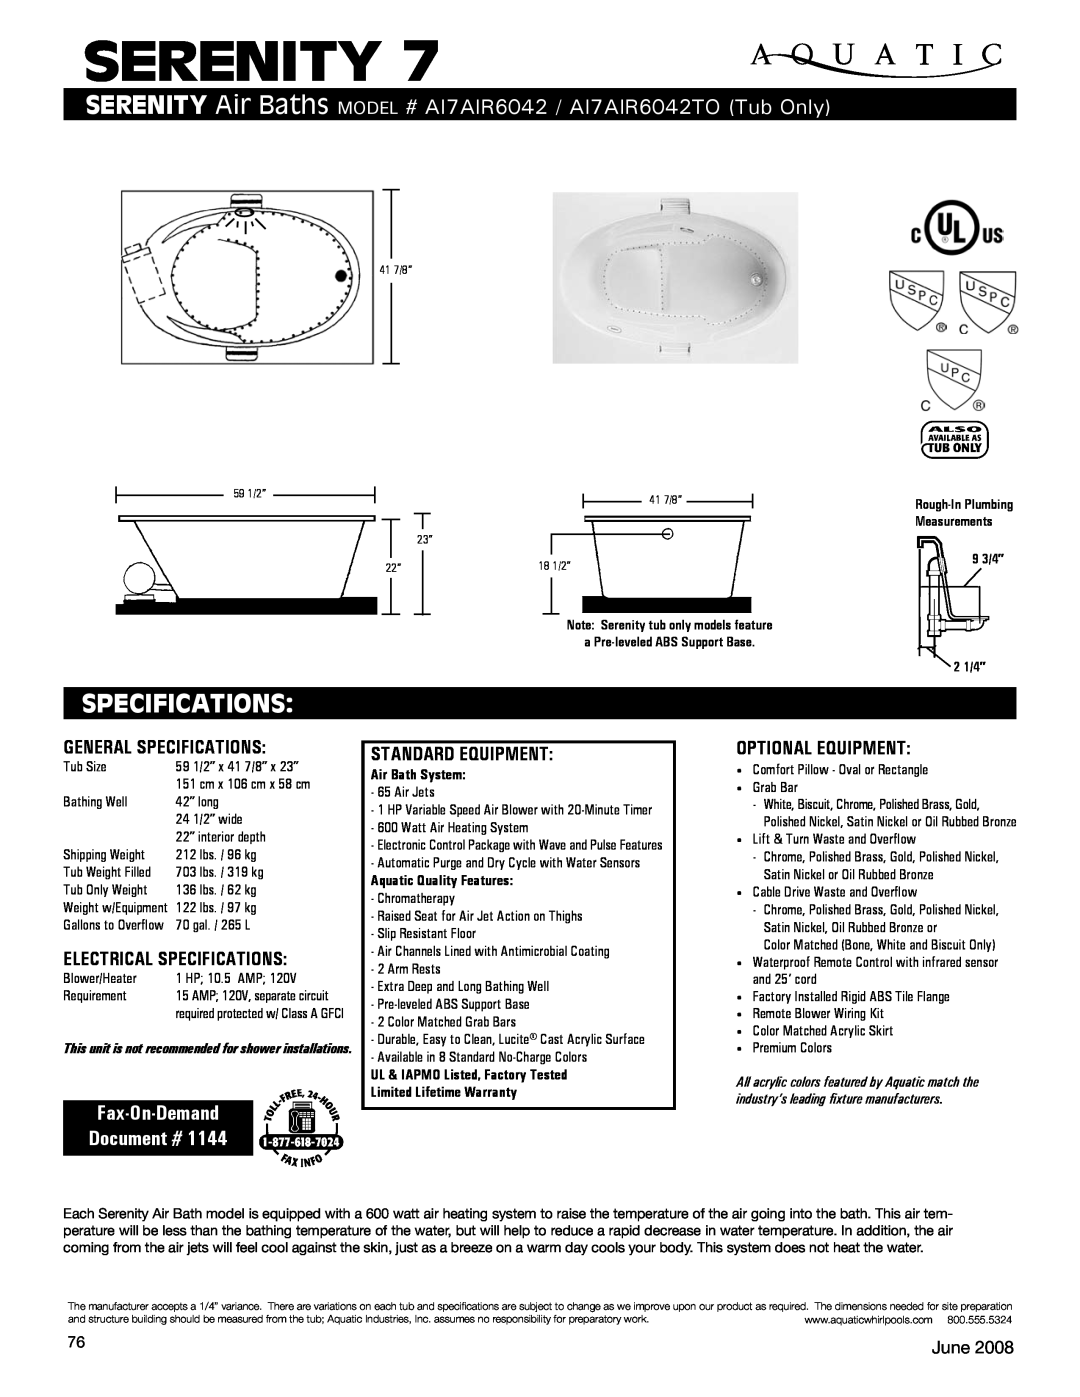 Aquatic specifications Specifications, Serenity Air Baths Model # AI7AIR6042 / AI7AIR6042TO Tub Only, June, 9 3/4” 